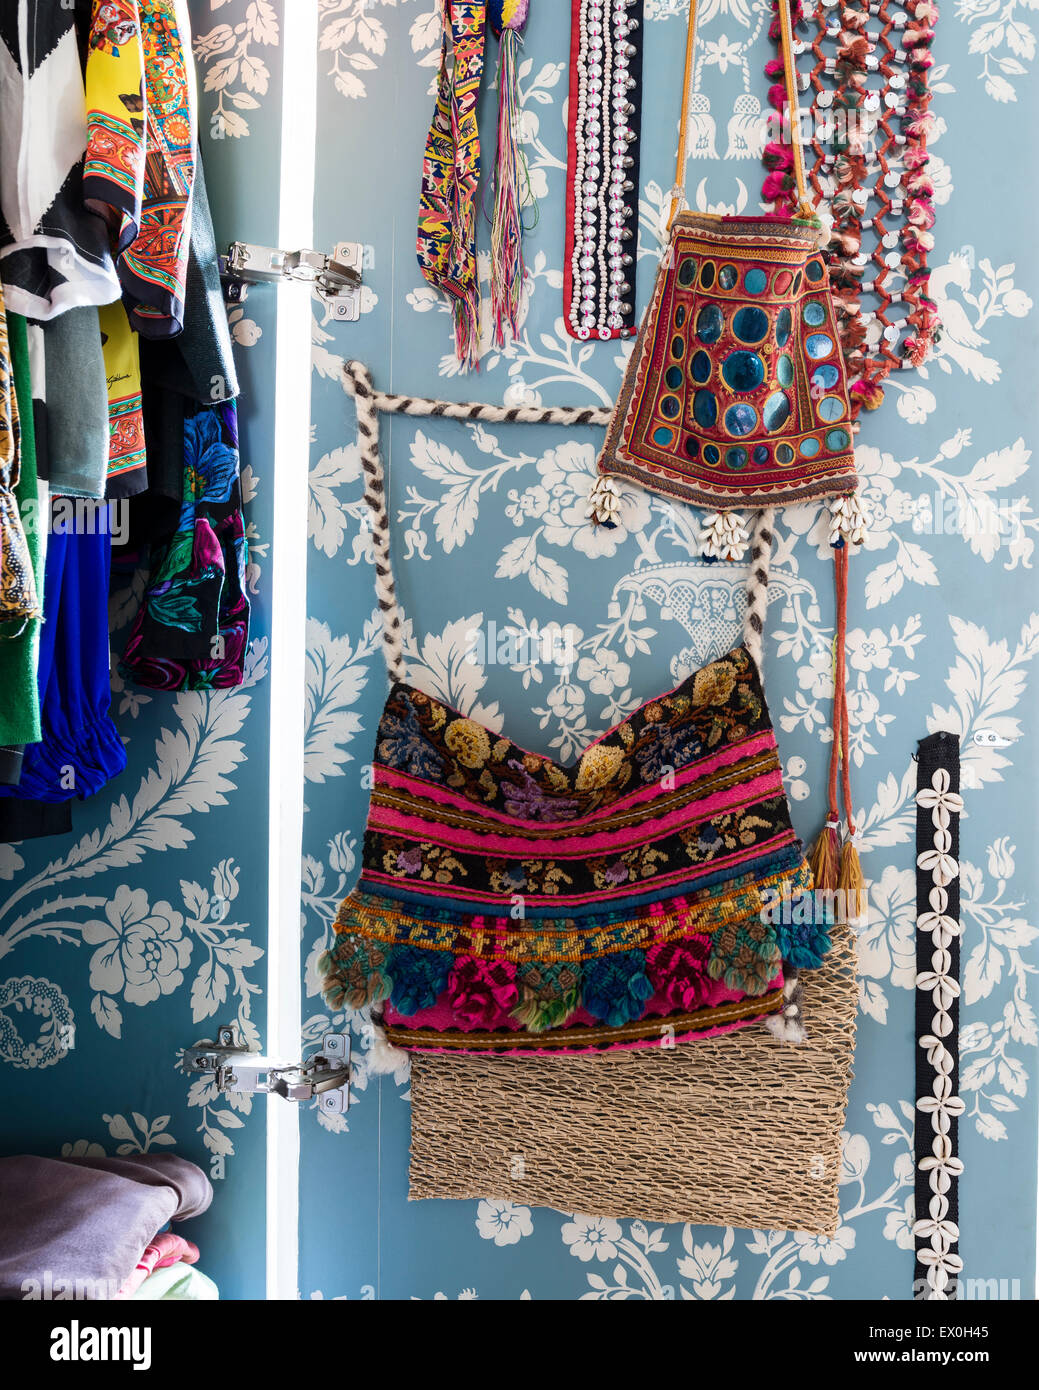 Interior of a wardrobe hung with ethnic bags and necklaces Stock Photo